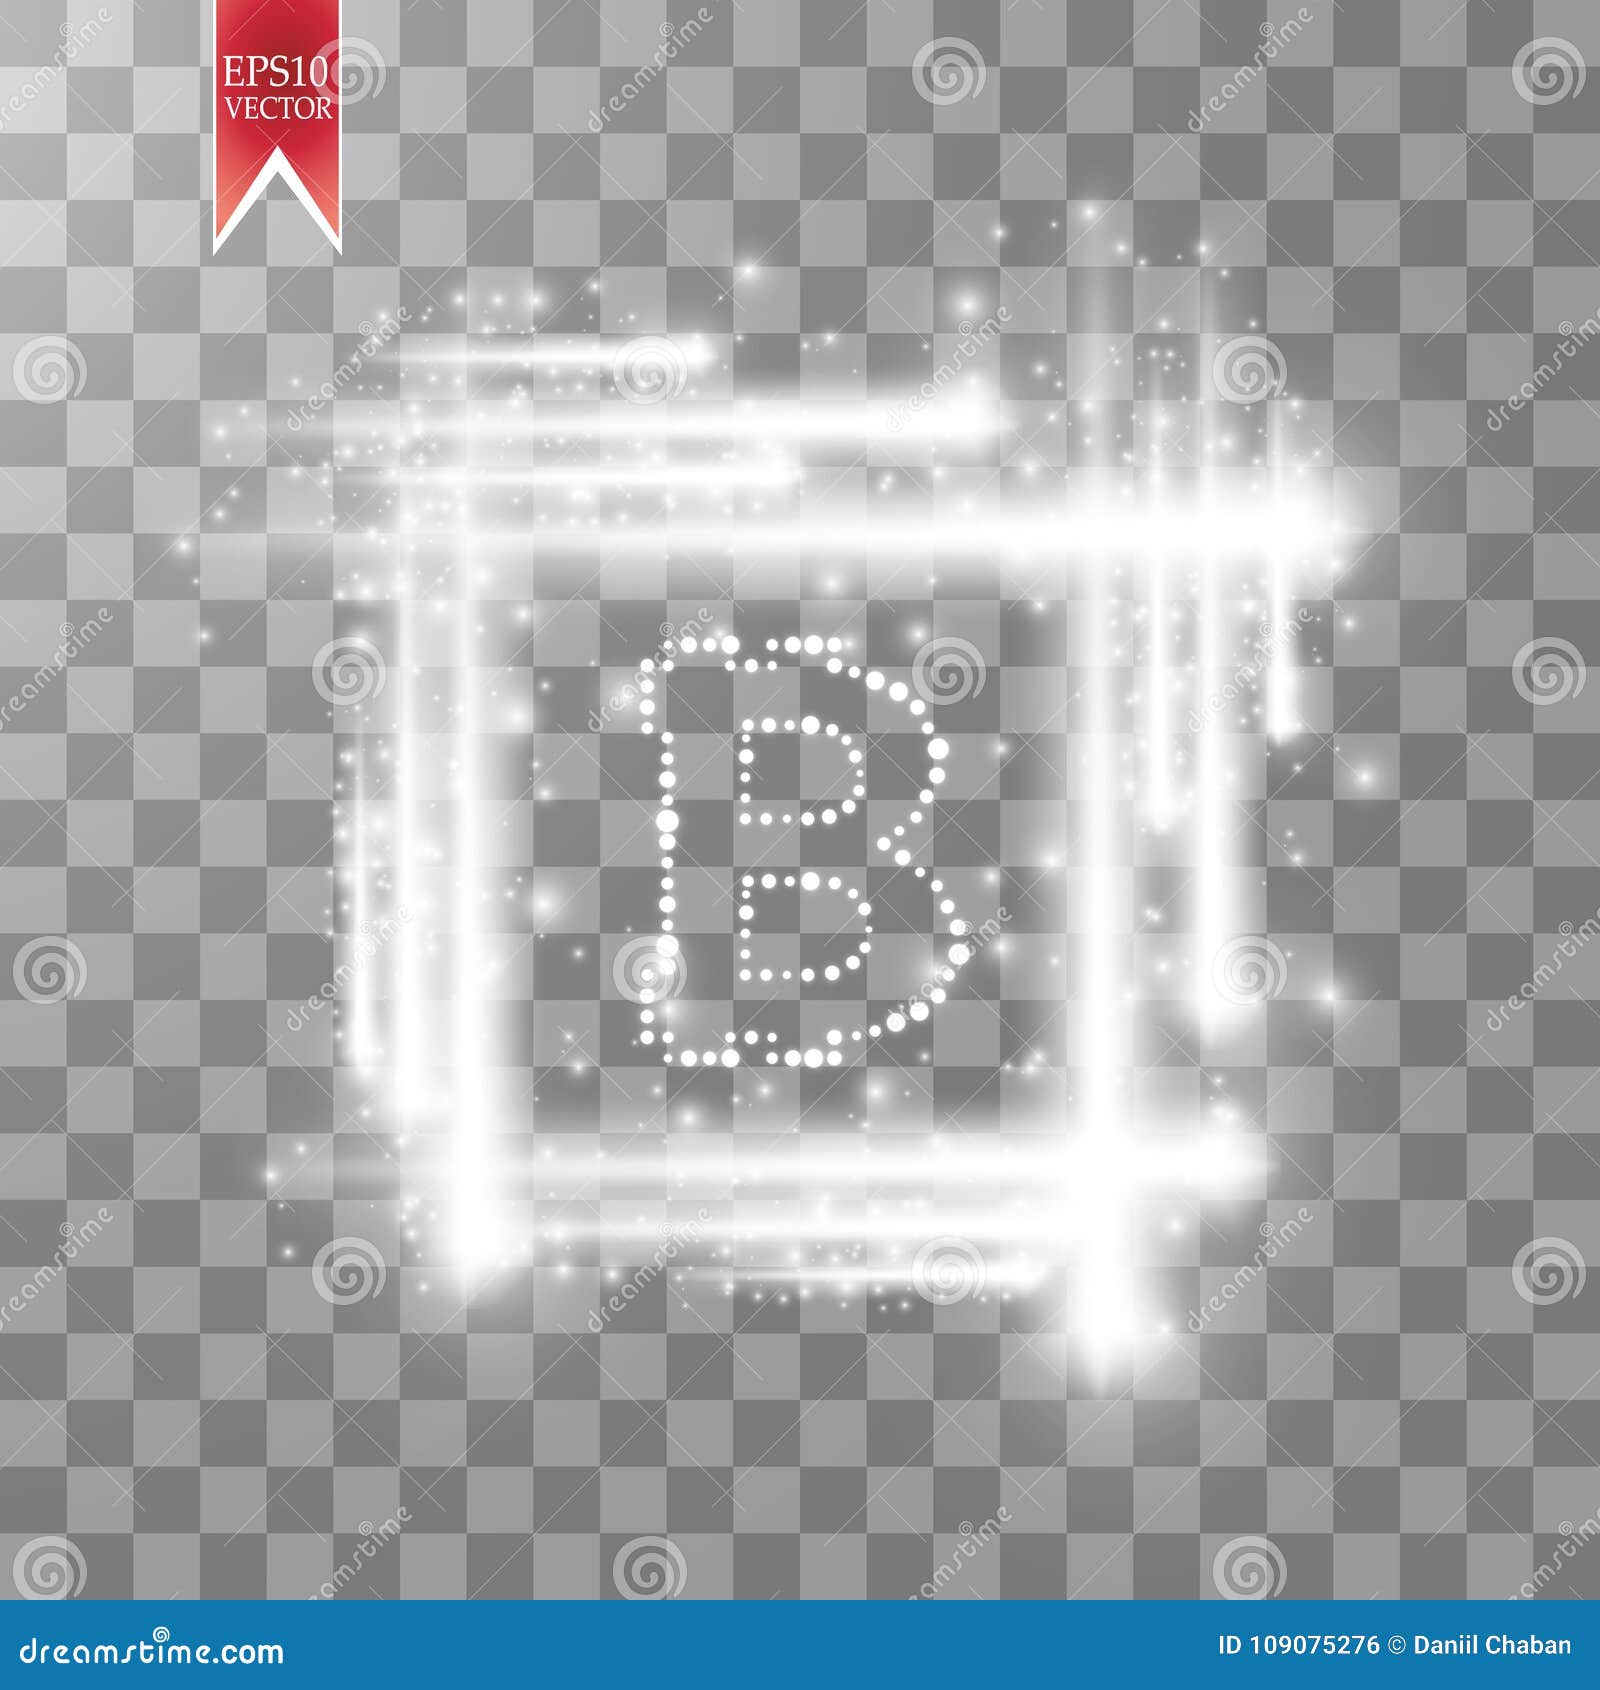 digital bitcoins  with light sqare effect on transparent backgraund.